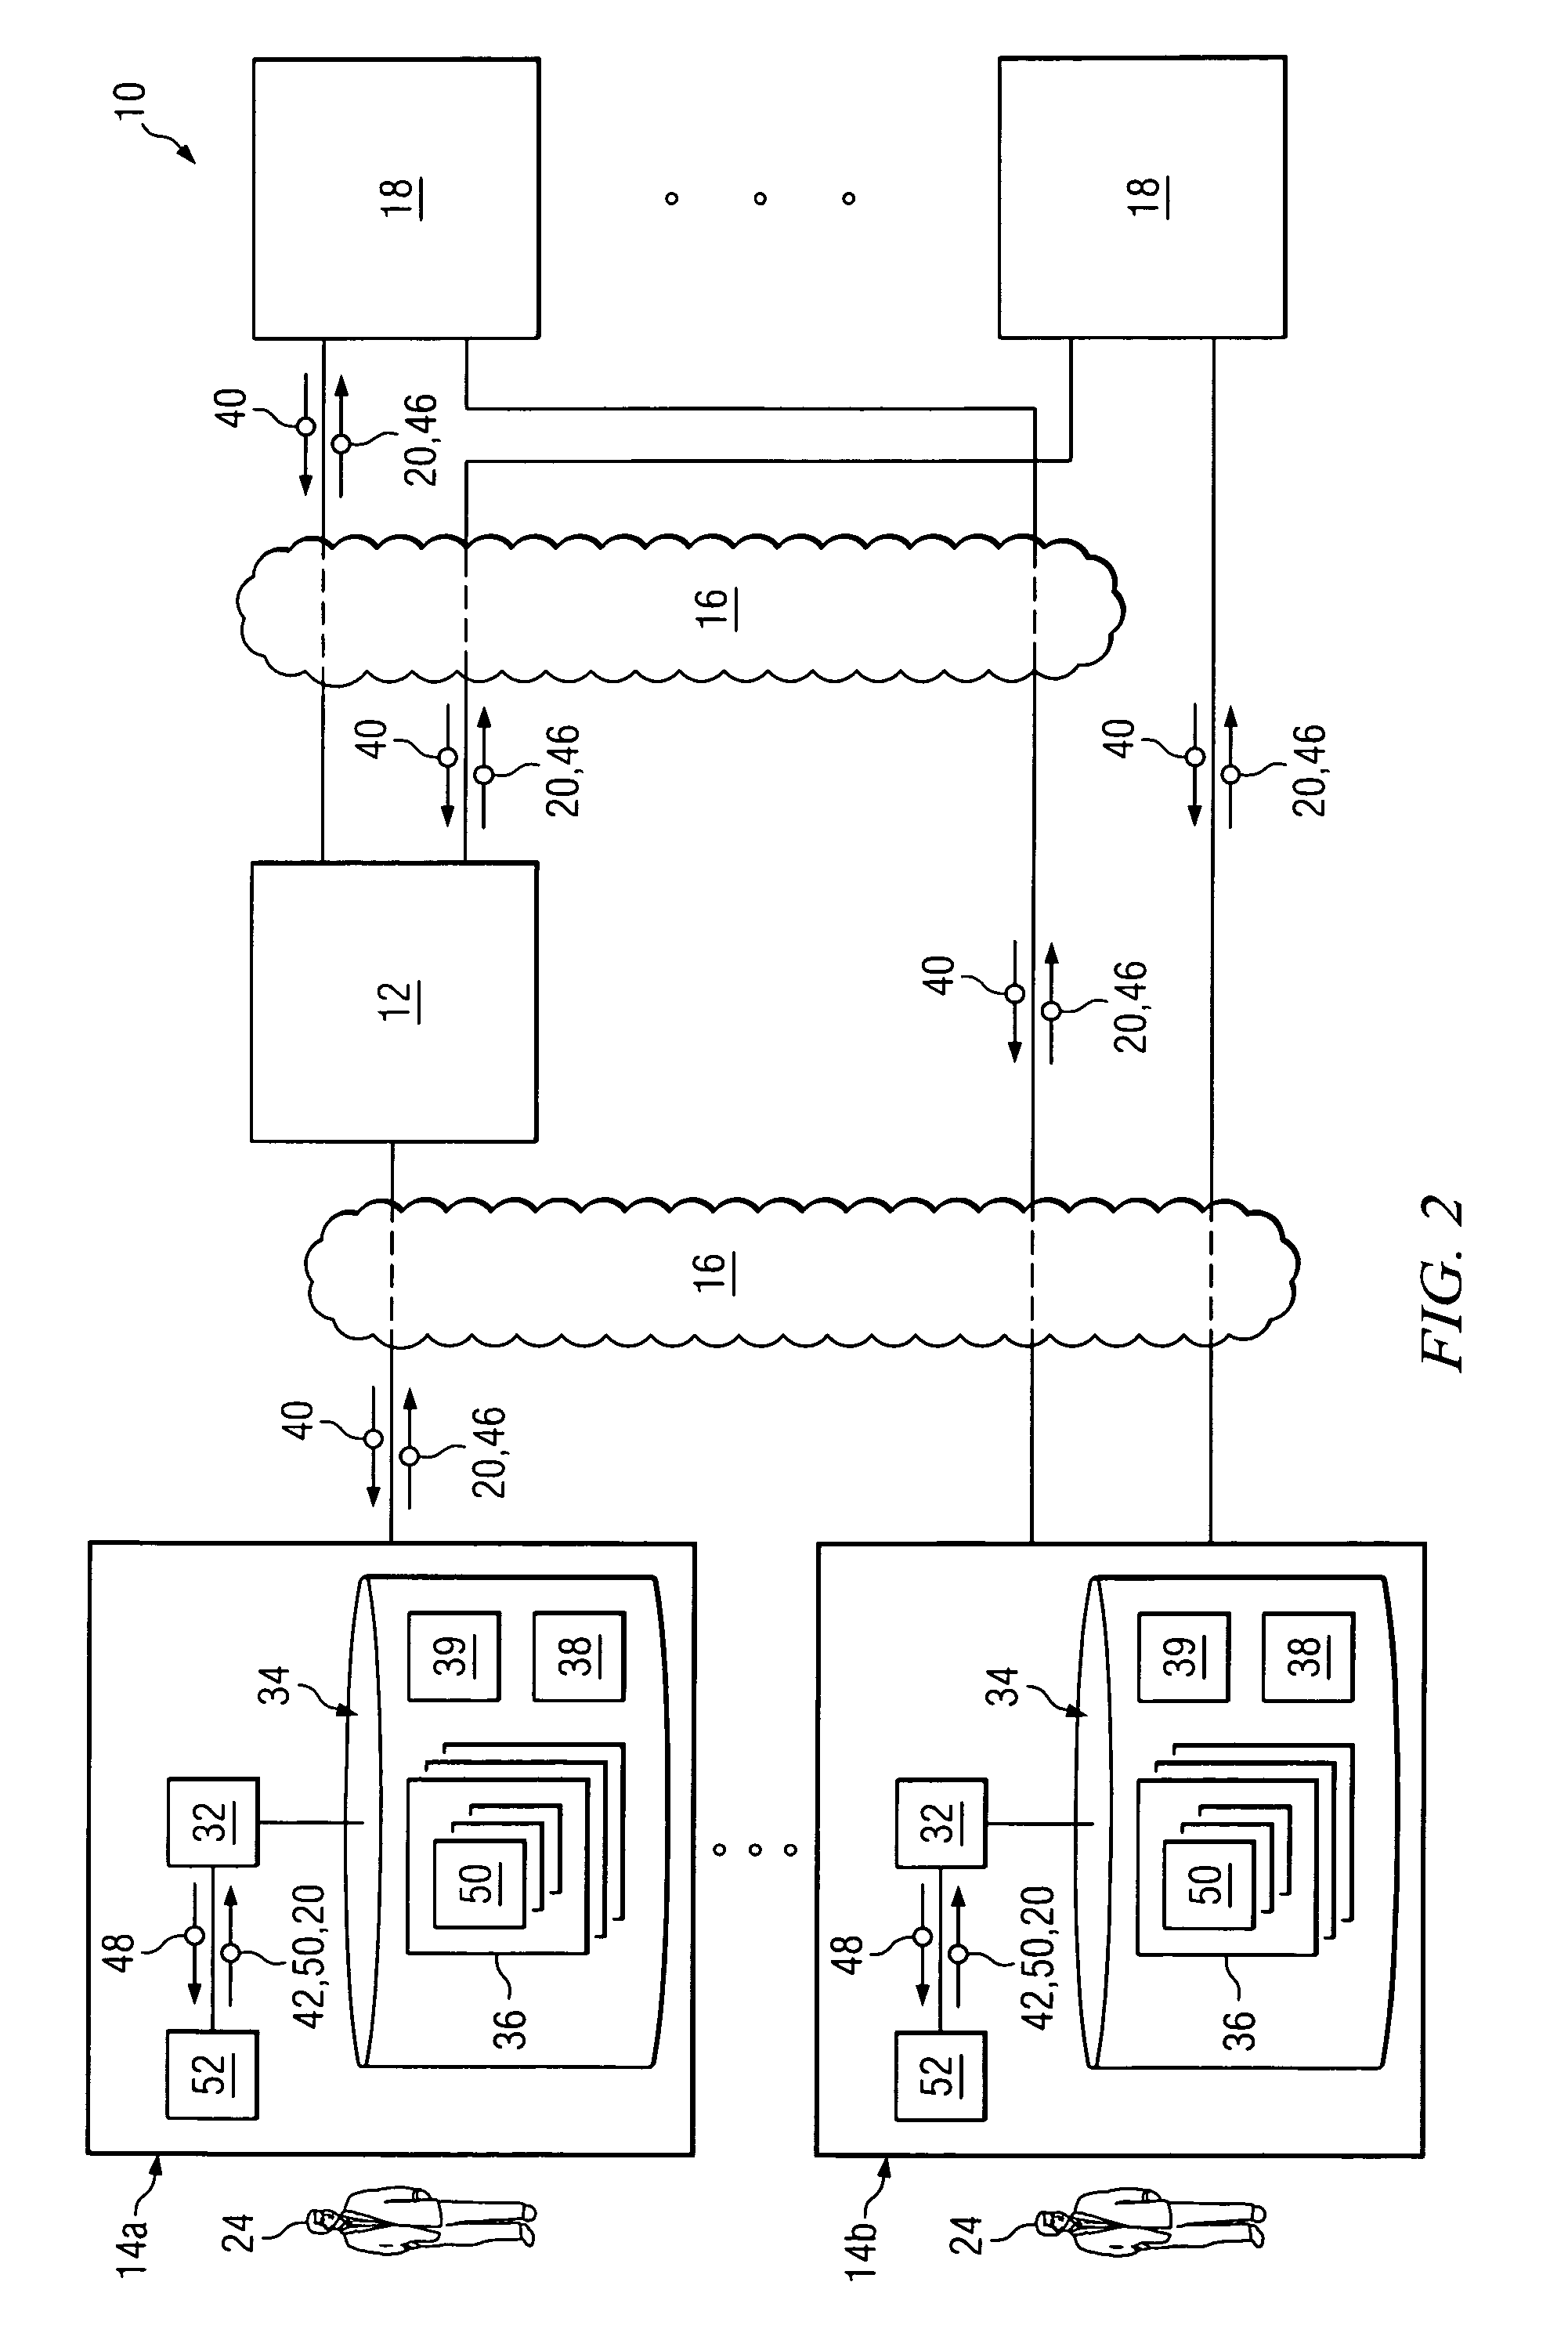 Methods and apparatus for composite trading order processing